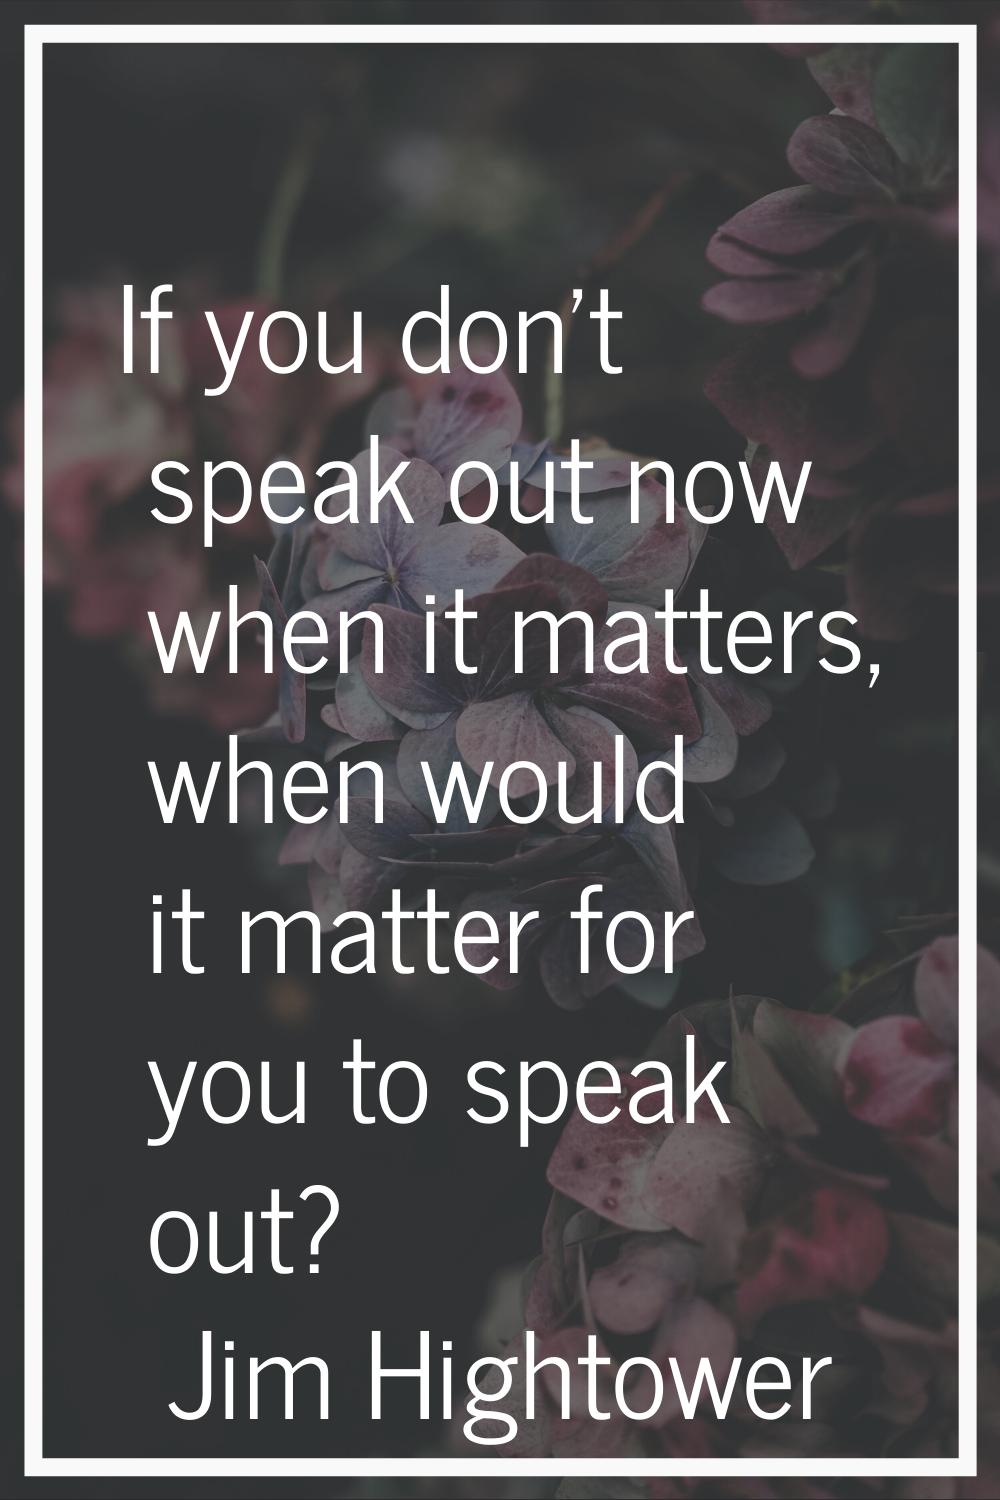 If you don't speak out now when it matters, when would it matter for you to speak out?